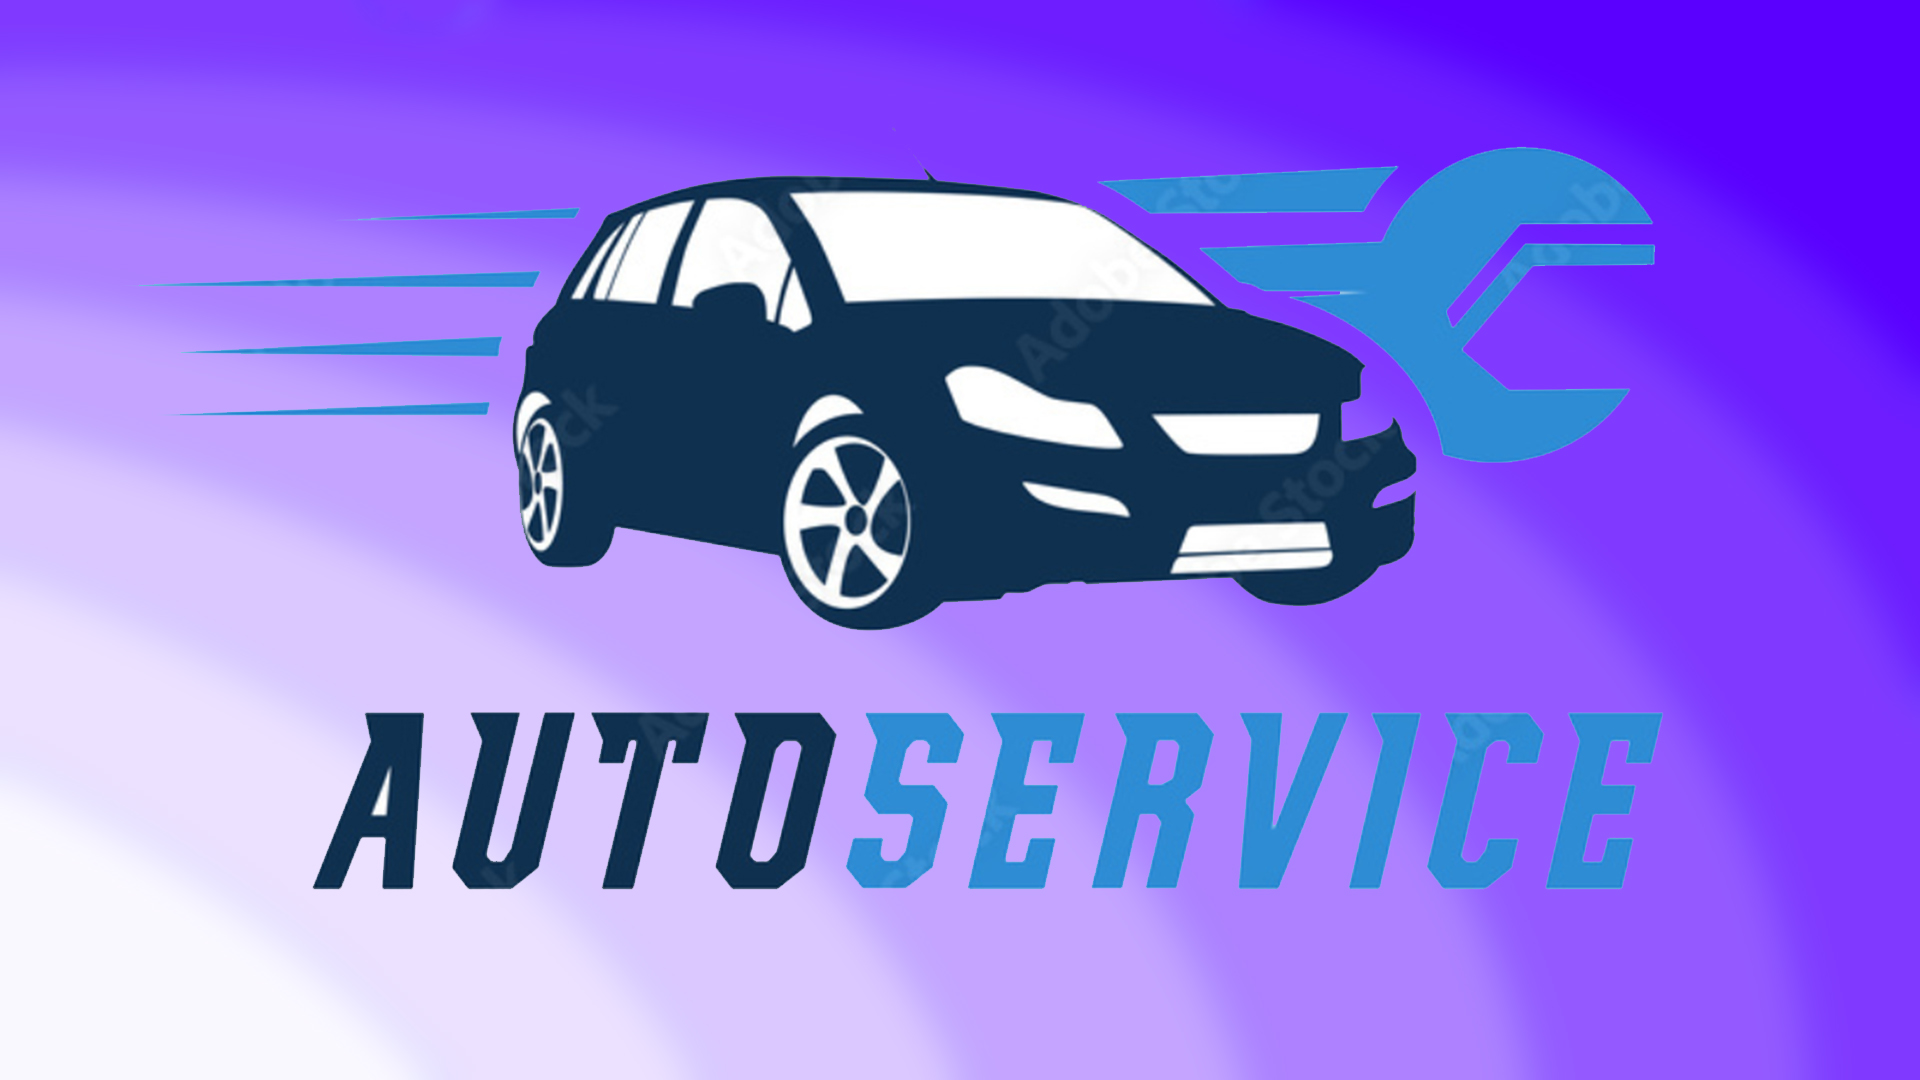 Image that contains vector of a car detail service.